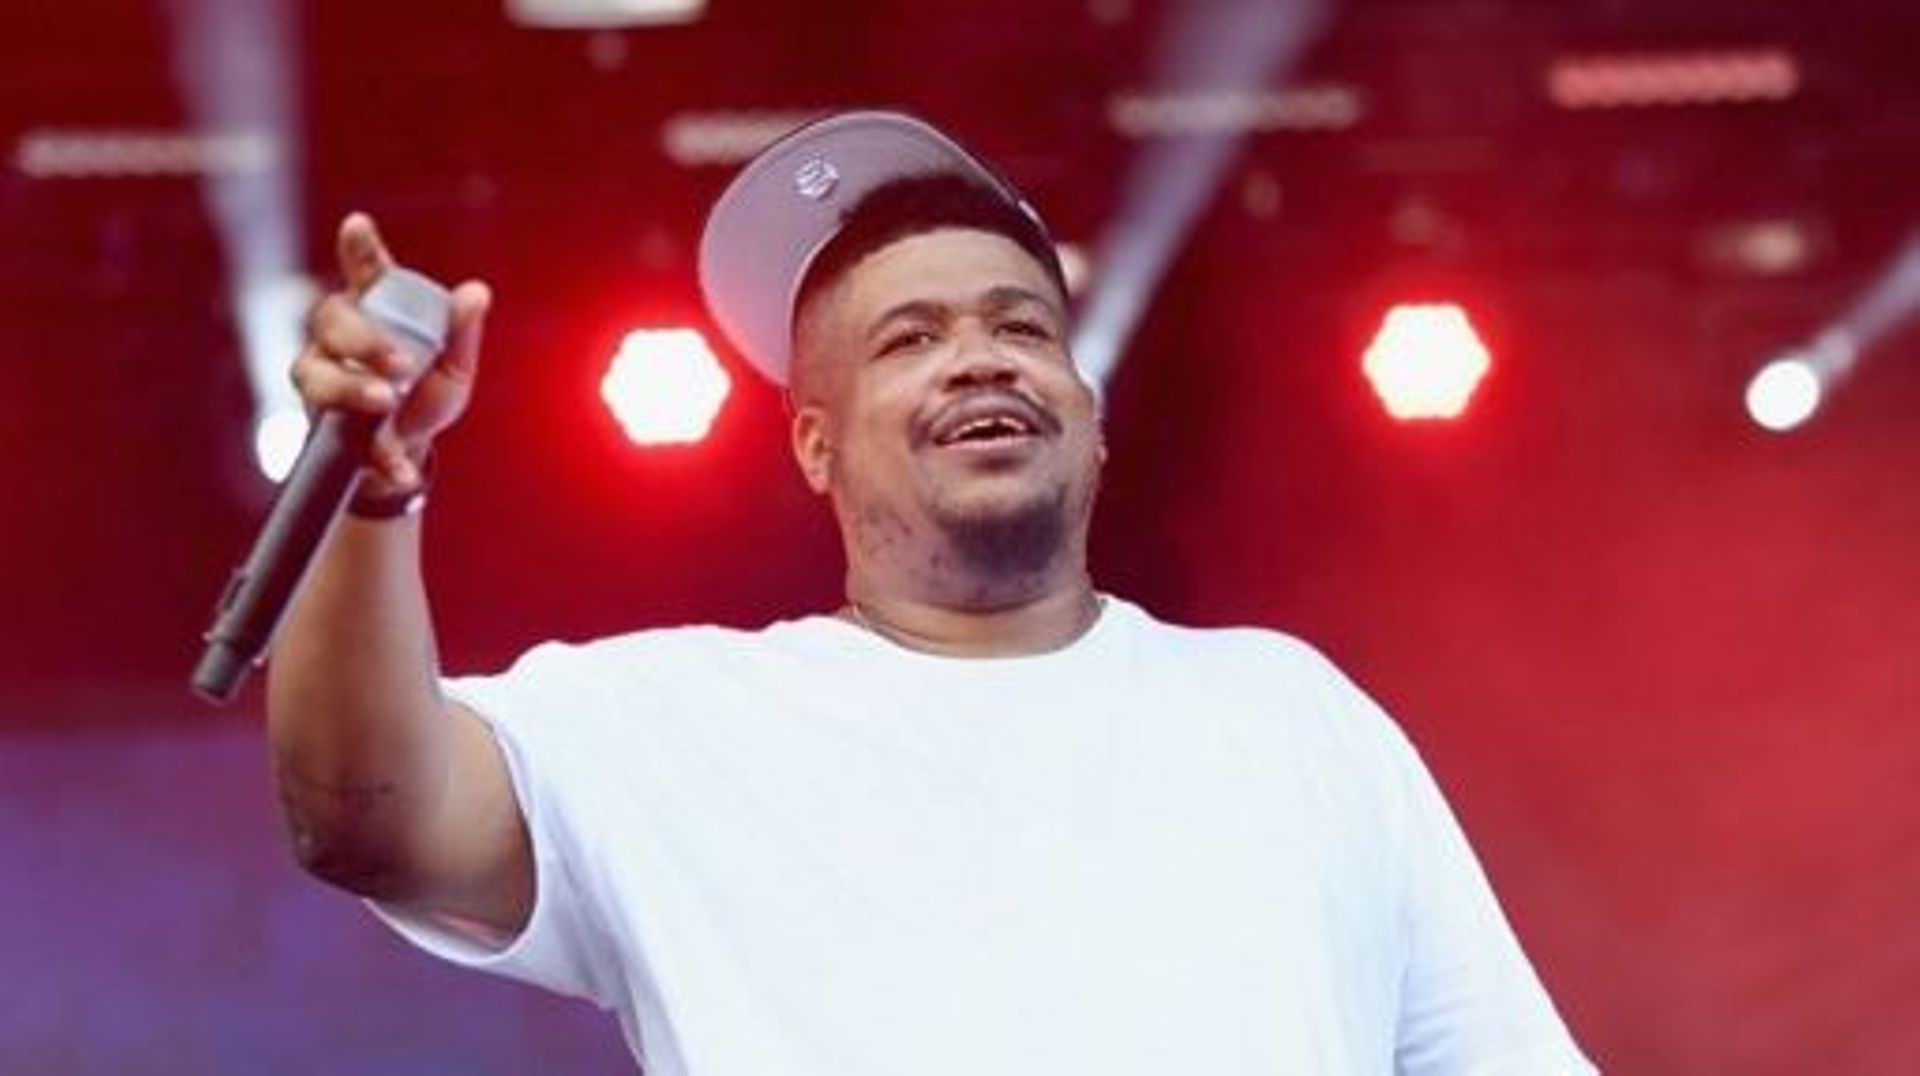 (FILES) In this file photo taken on September 16, 2017, rapper David Jude Jolicoeur, of De La Soul, performs onstage during the Meadows Music And Arts Festival - Day 2 at Citi Field in New York City. David Jolicoeur, member of the De La Soul trio who went